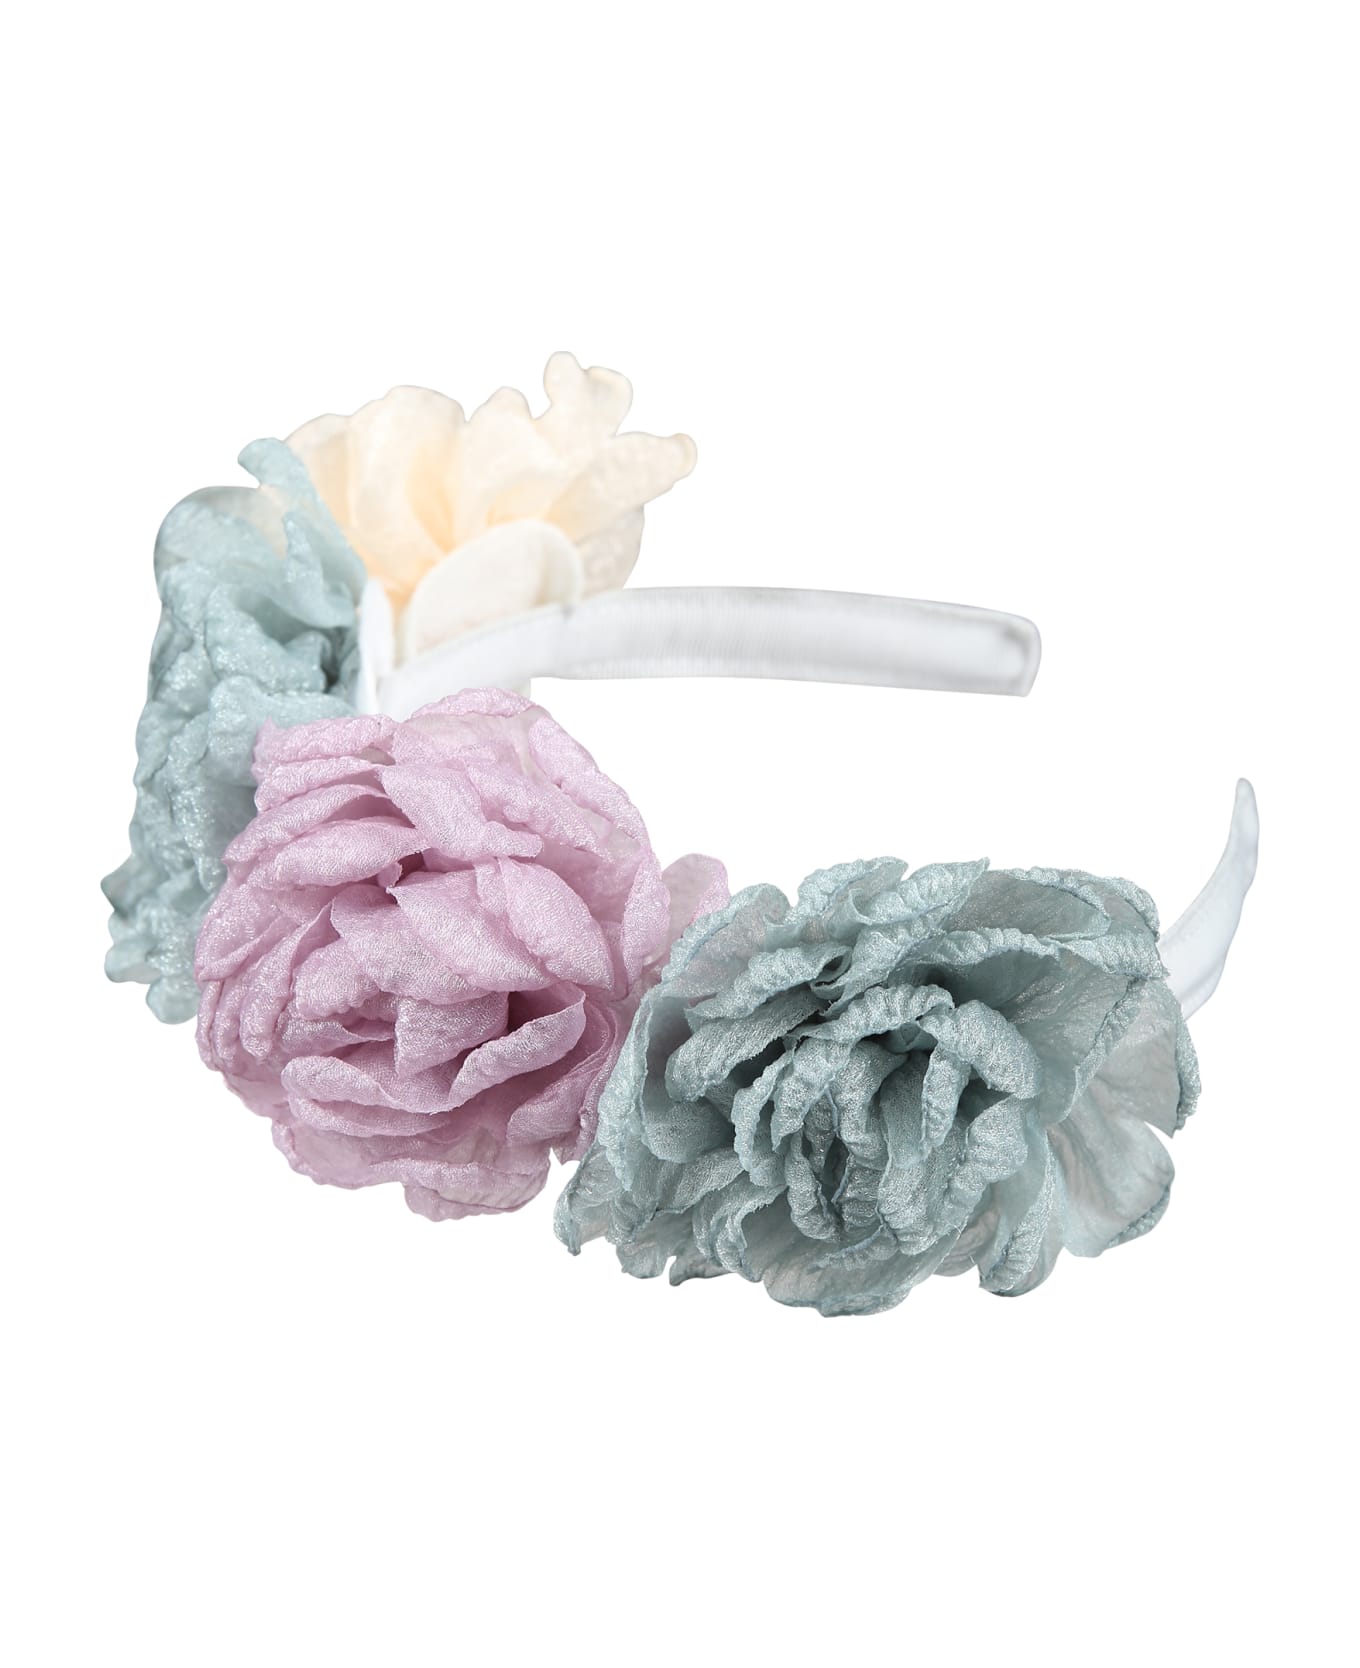 Caffe' d'Orzo Multicolor Headband For Girl With Roses - Multicolor アクセサリー＆ギフト